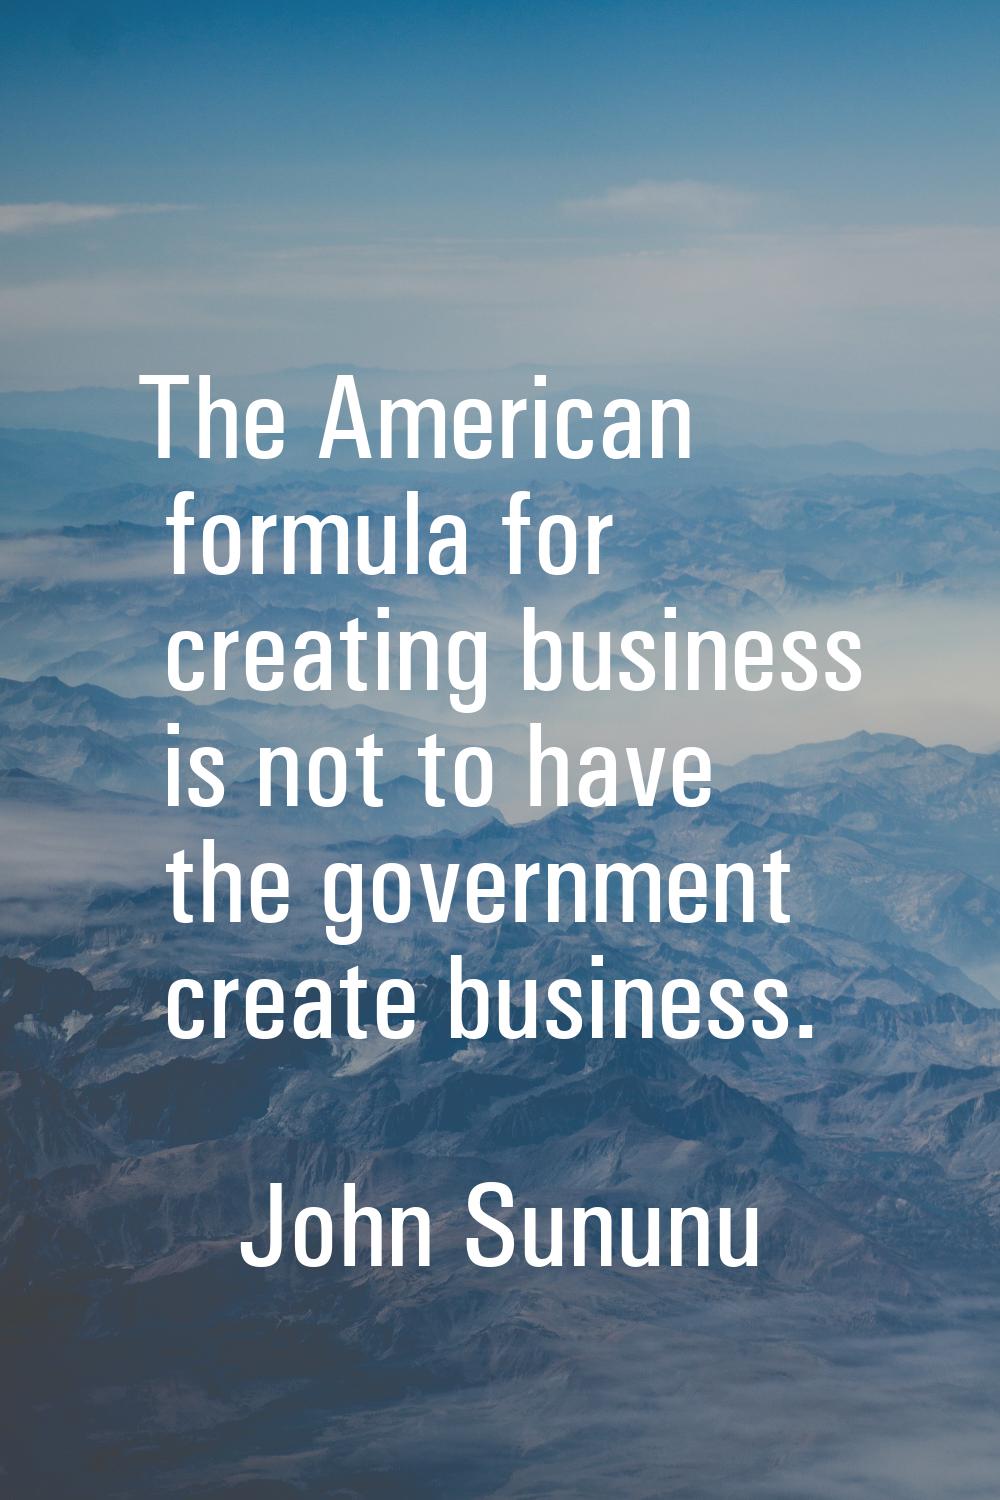 The American formula for creating business is not to have the government create business.